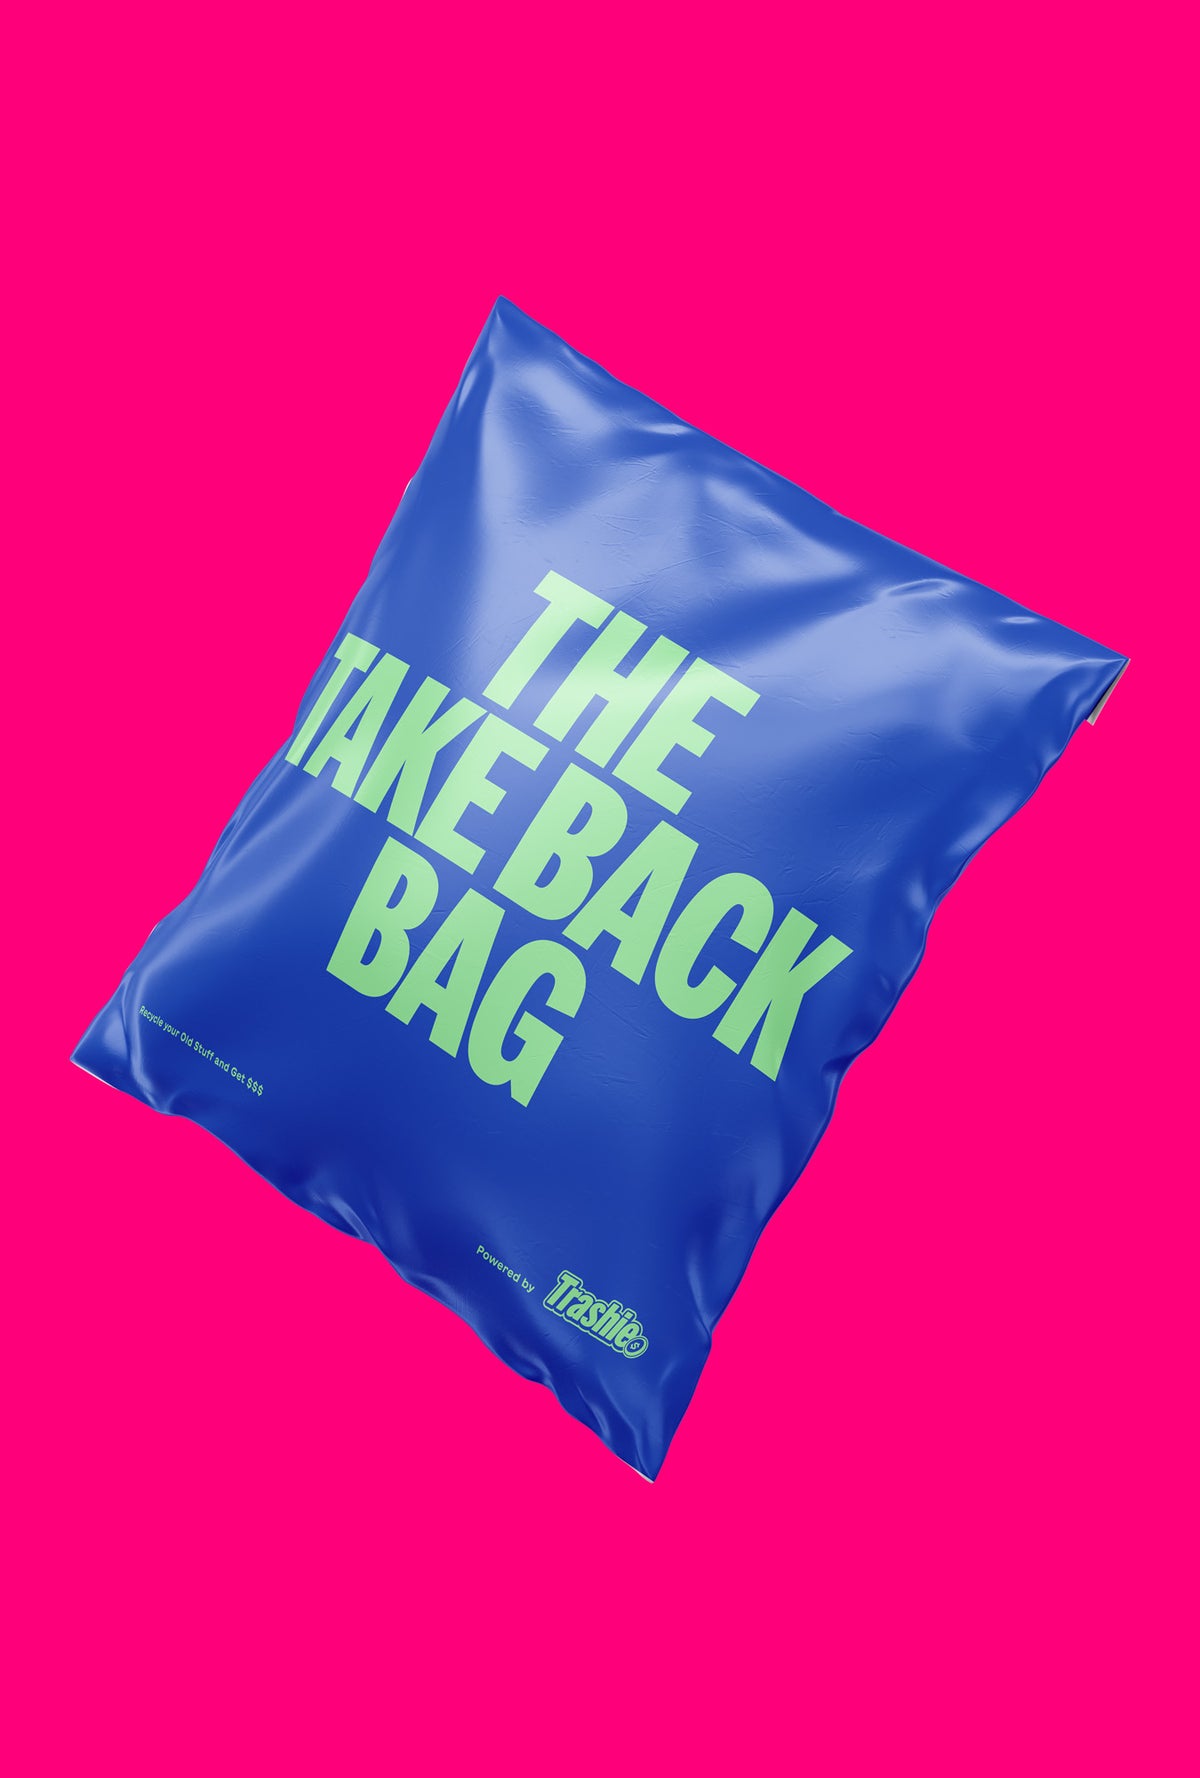 Take Back Bag: $30 Credit For Recycling